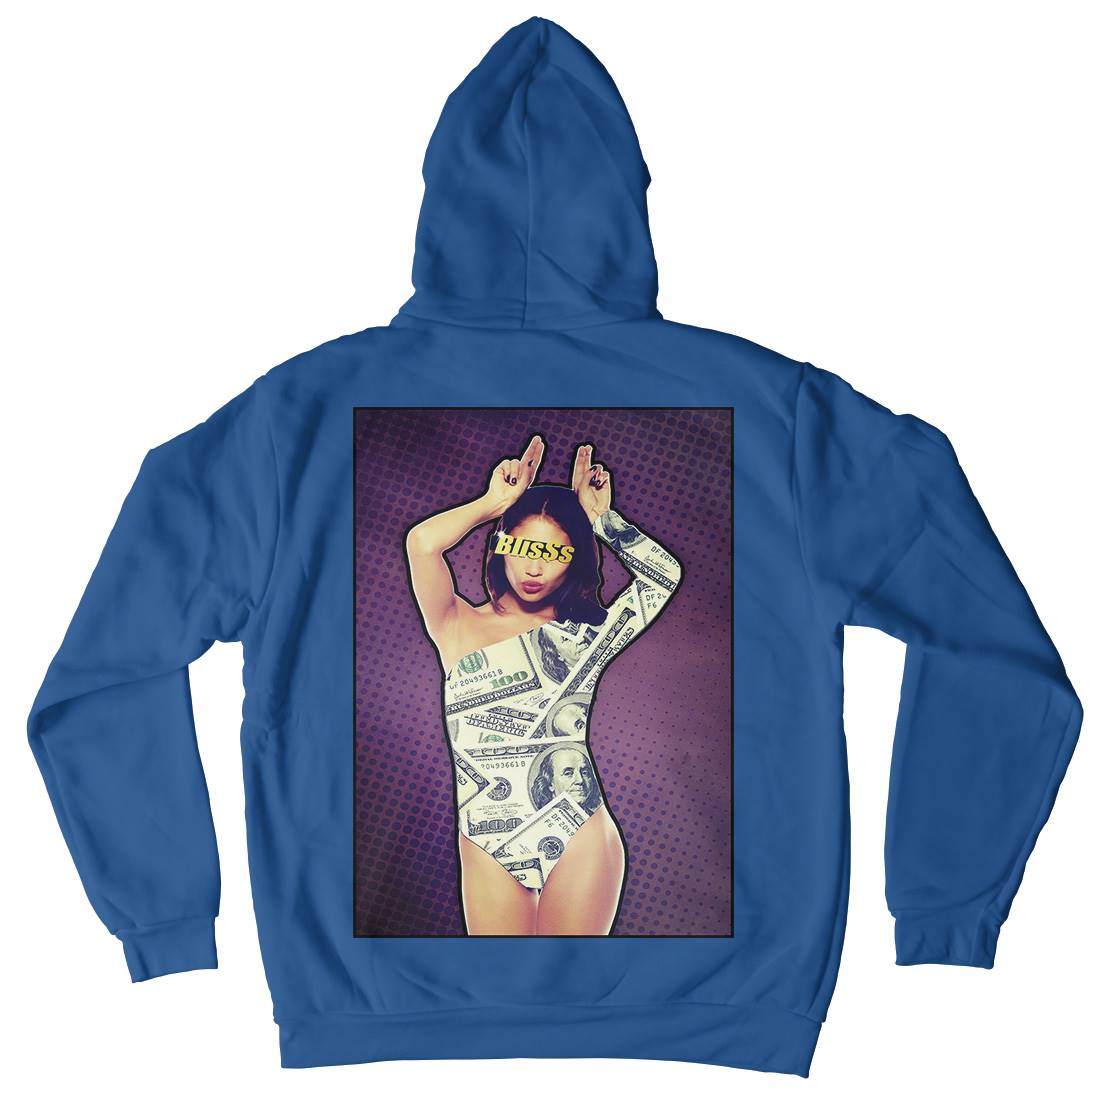 This Is Bliss Kids Crew Neck Hoodie Art A928